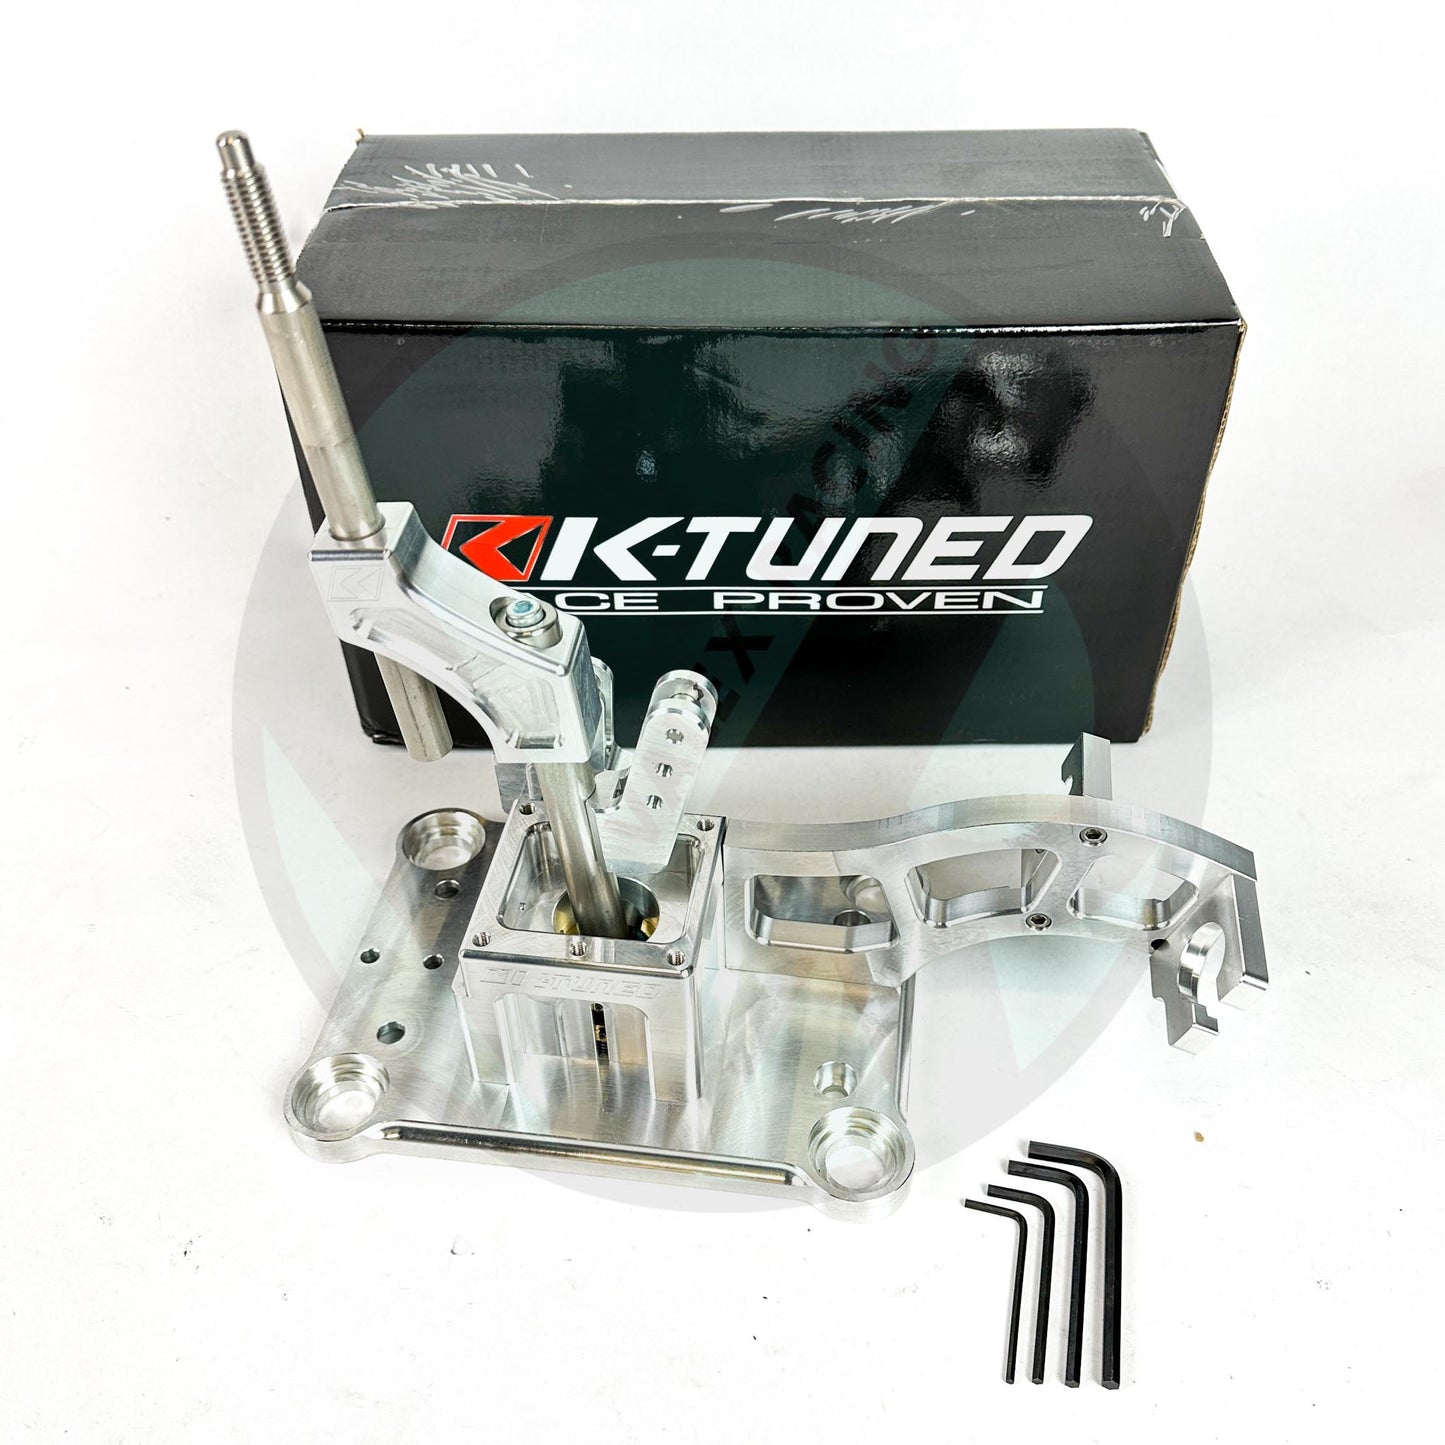 K Tuned Street Rev 2 Billet RSX Shifter and Race Spec Shifter Cables